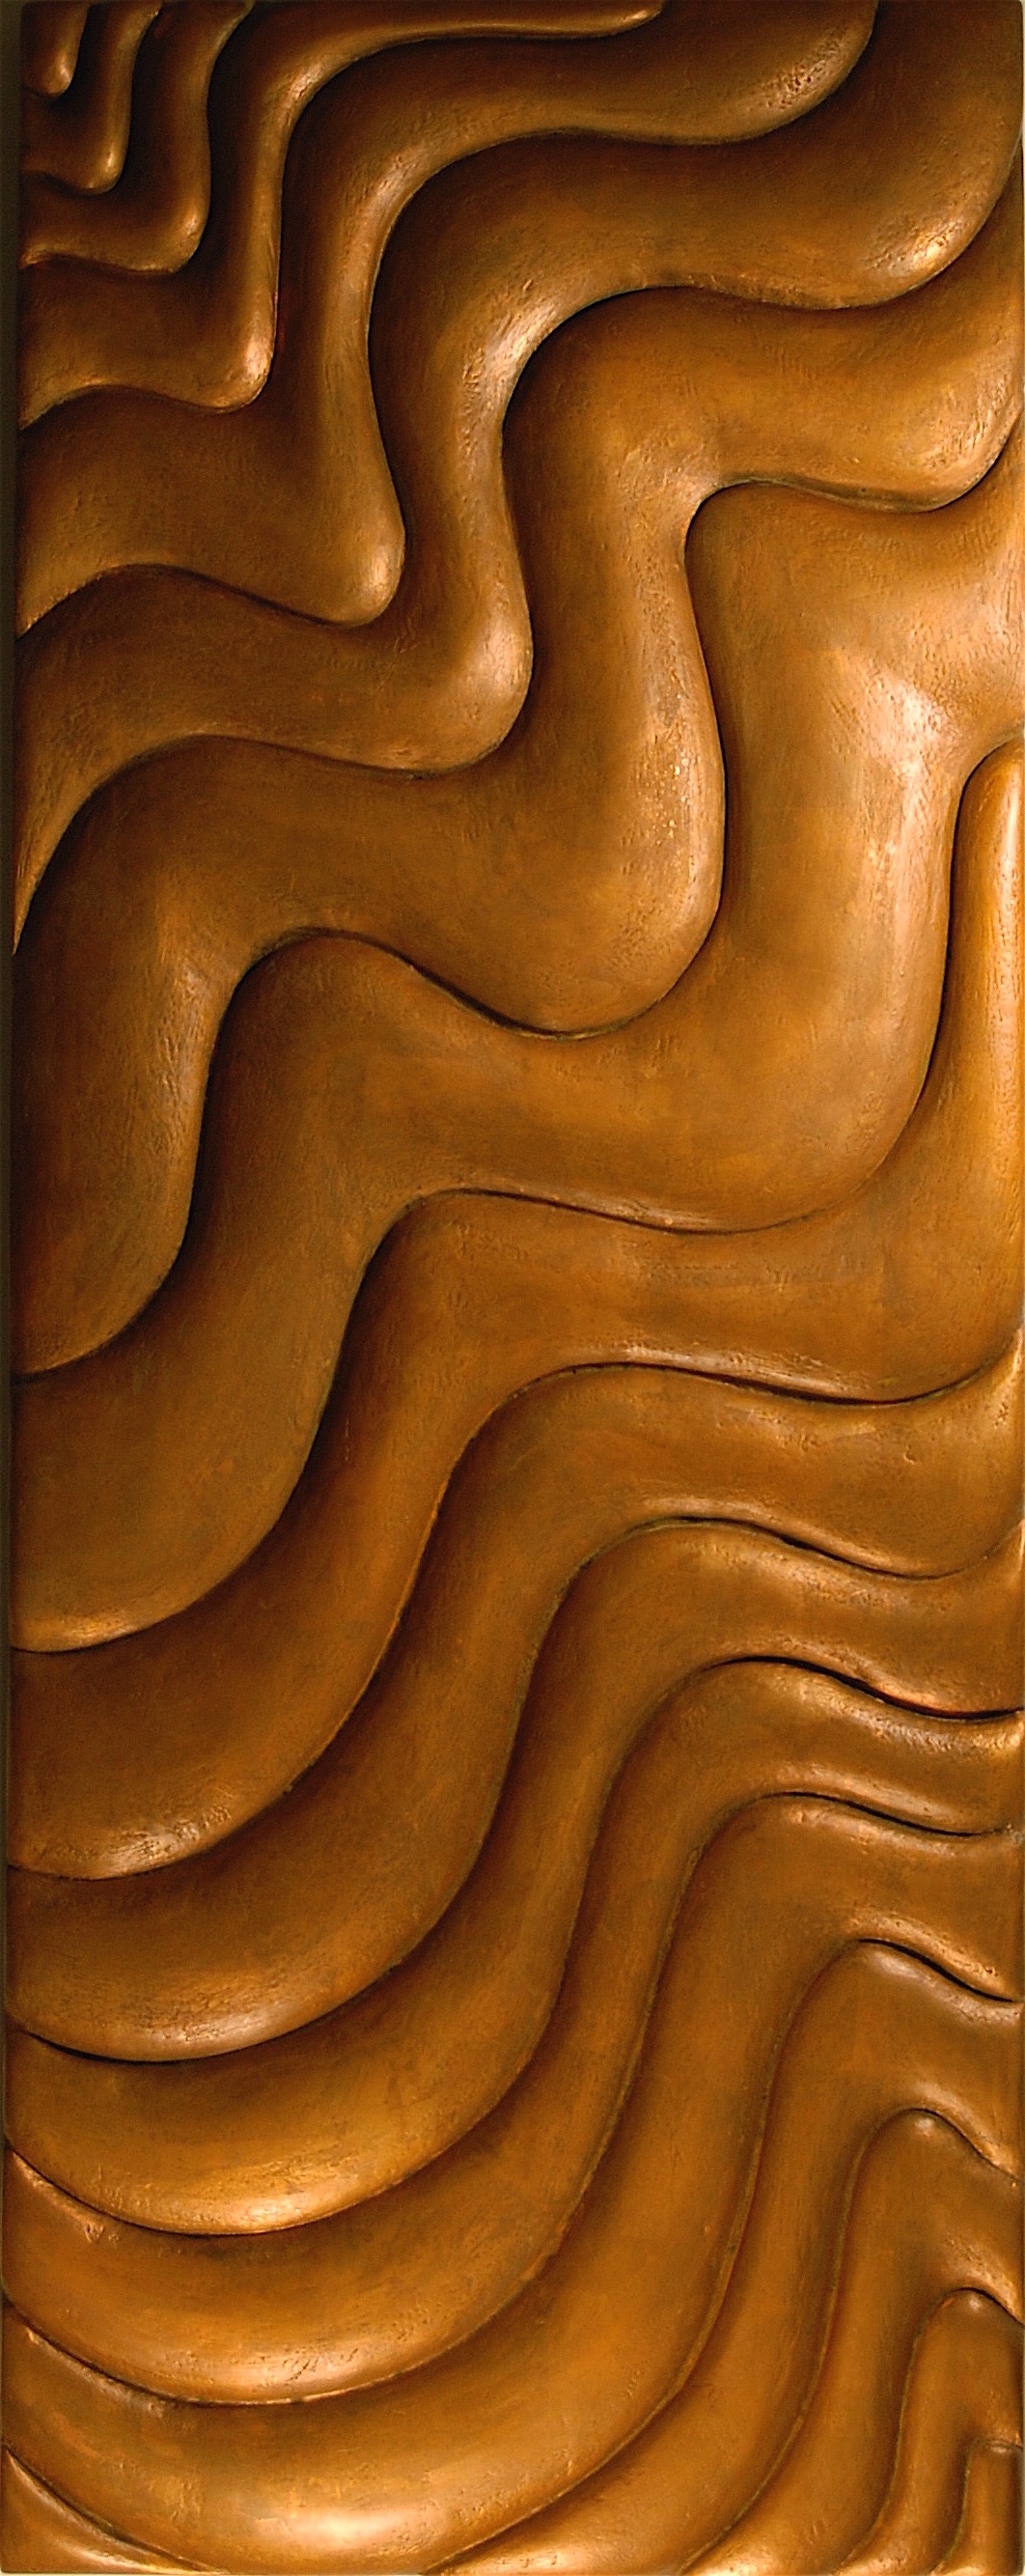 Thomas Coffin - Wave Effect (copper leaf), 59"h x 23"w x 4"d, mixed media sculptural wall relief